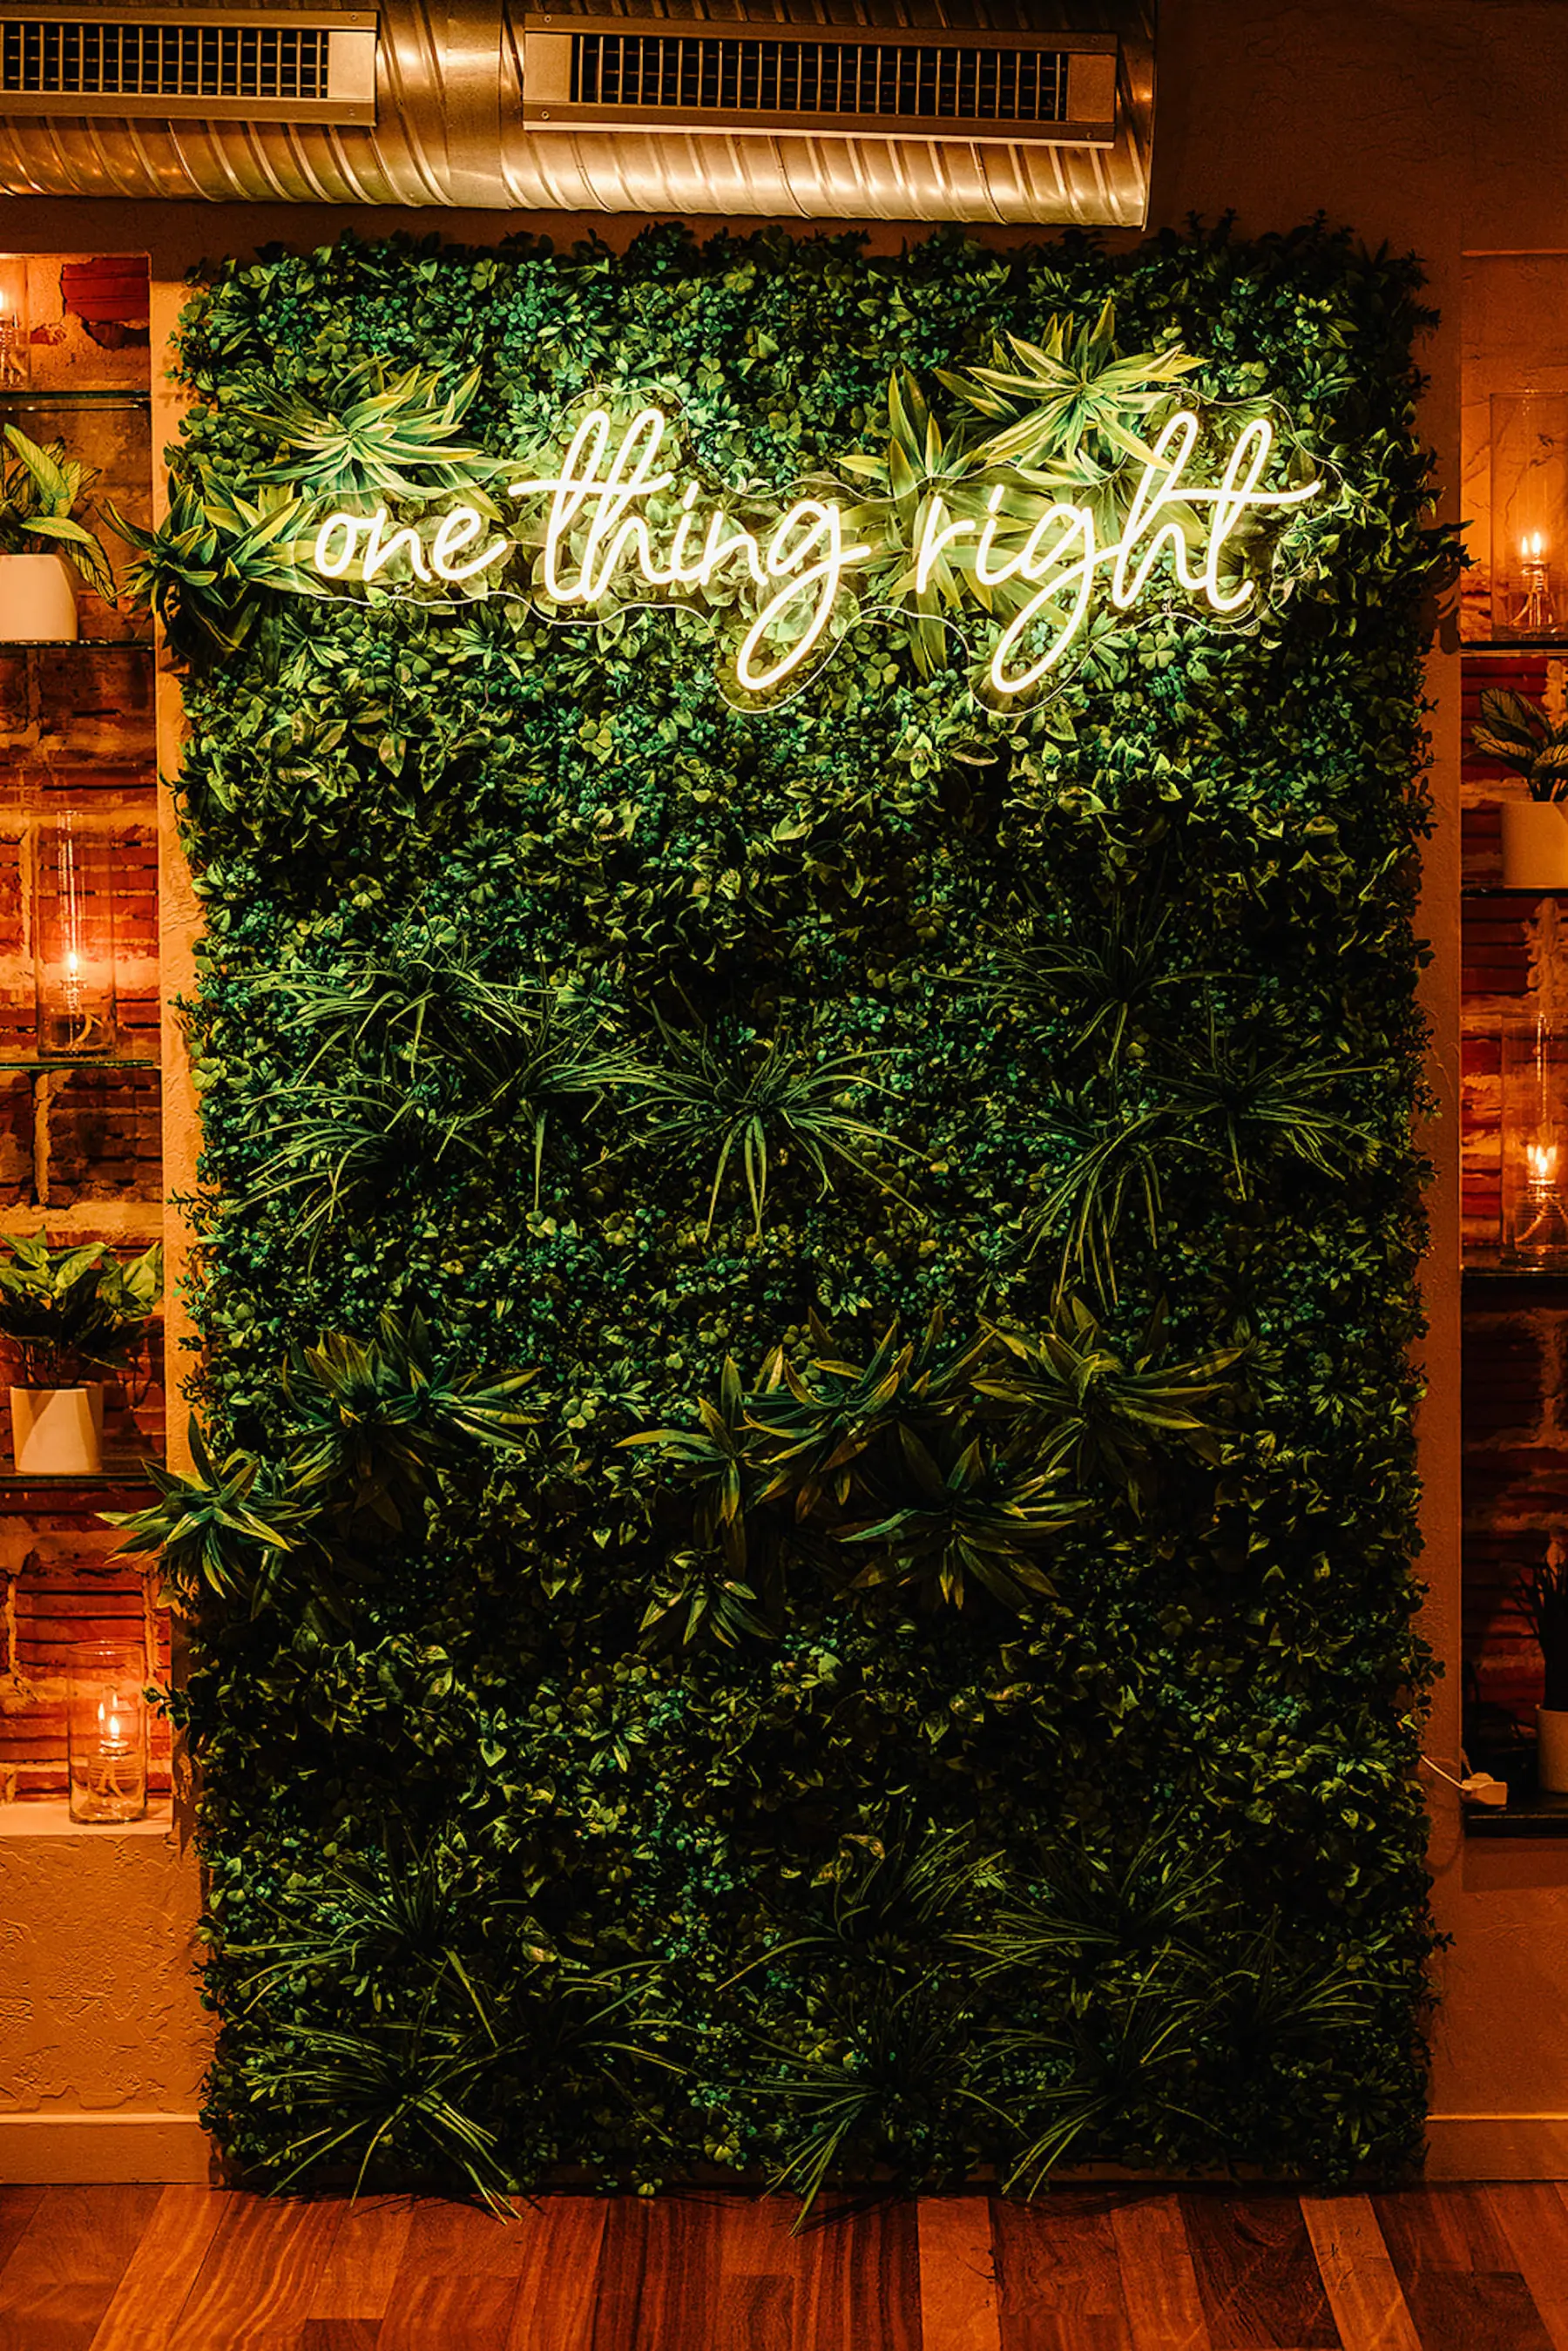 One Thing Right Neon Sign with Grass Wall Backdrop Wedding Reception Decor Ideas